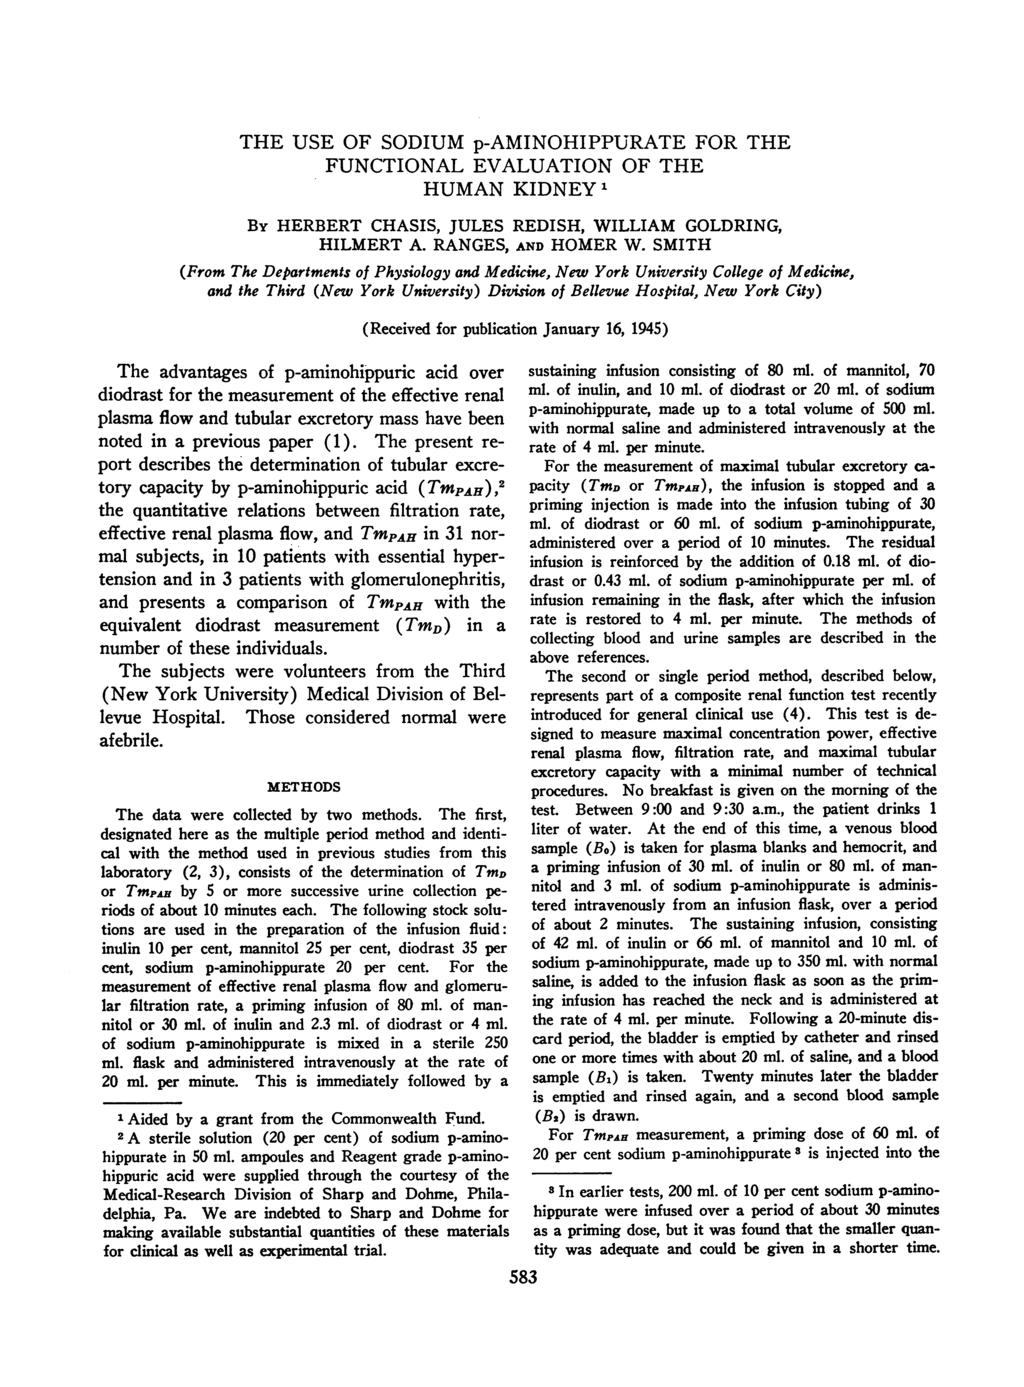 THE USE OF SODIUM p-aminohippurate FOR THE FUNCTIONAL EVALUATION OF THE HUMAN KIDNEY' By HERBERT CHASIS, JULES REDISH, WILLIAM GOLDRING, HILMERT A. RANGES, AND HOMER W.